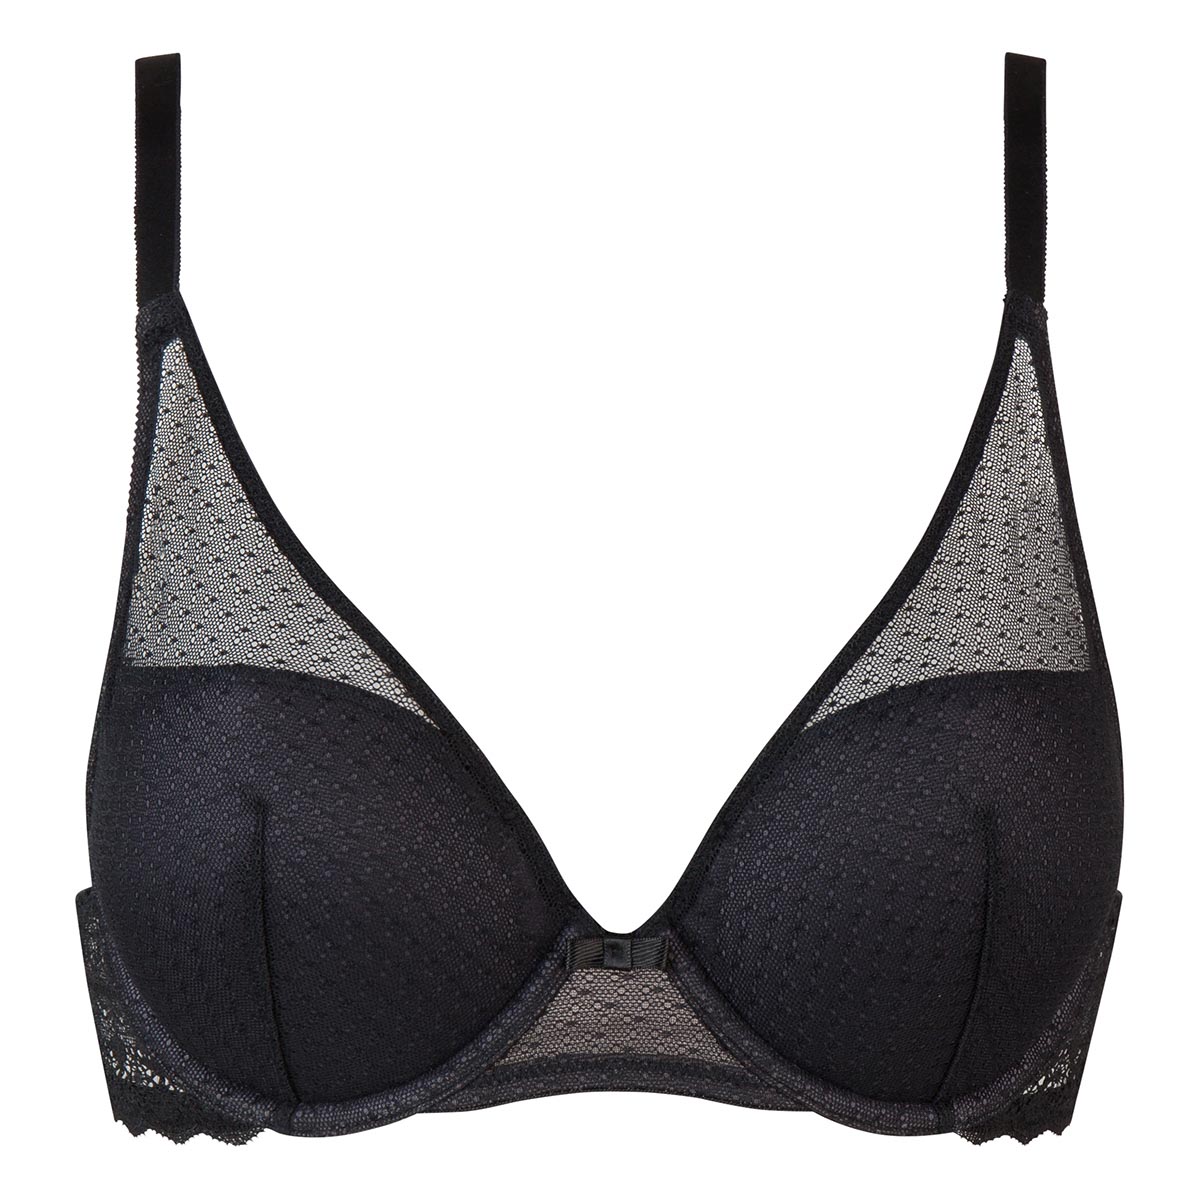 Dim Daily Glam black graphic lace push-up triangle bra